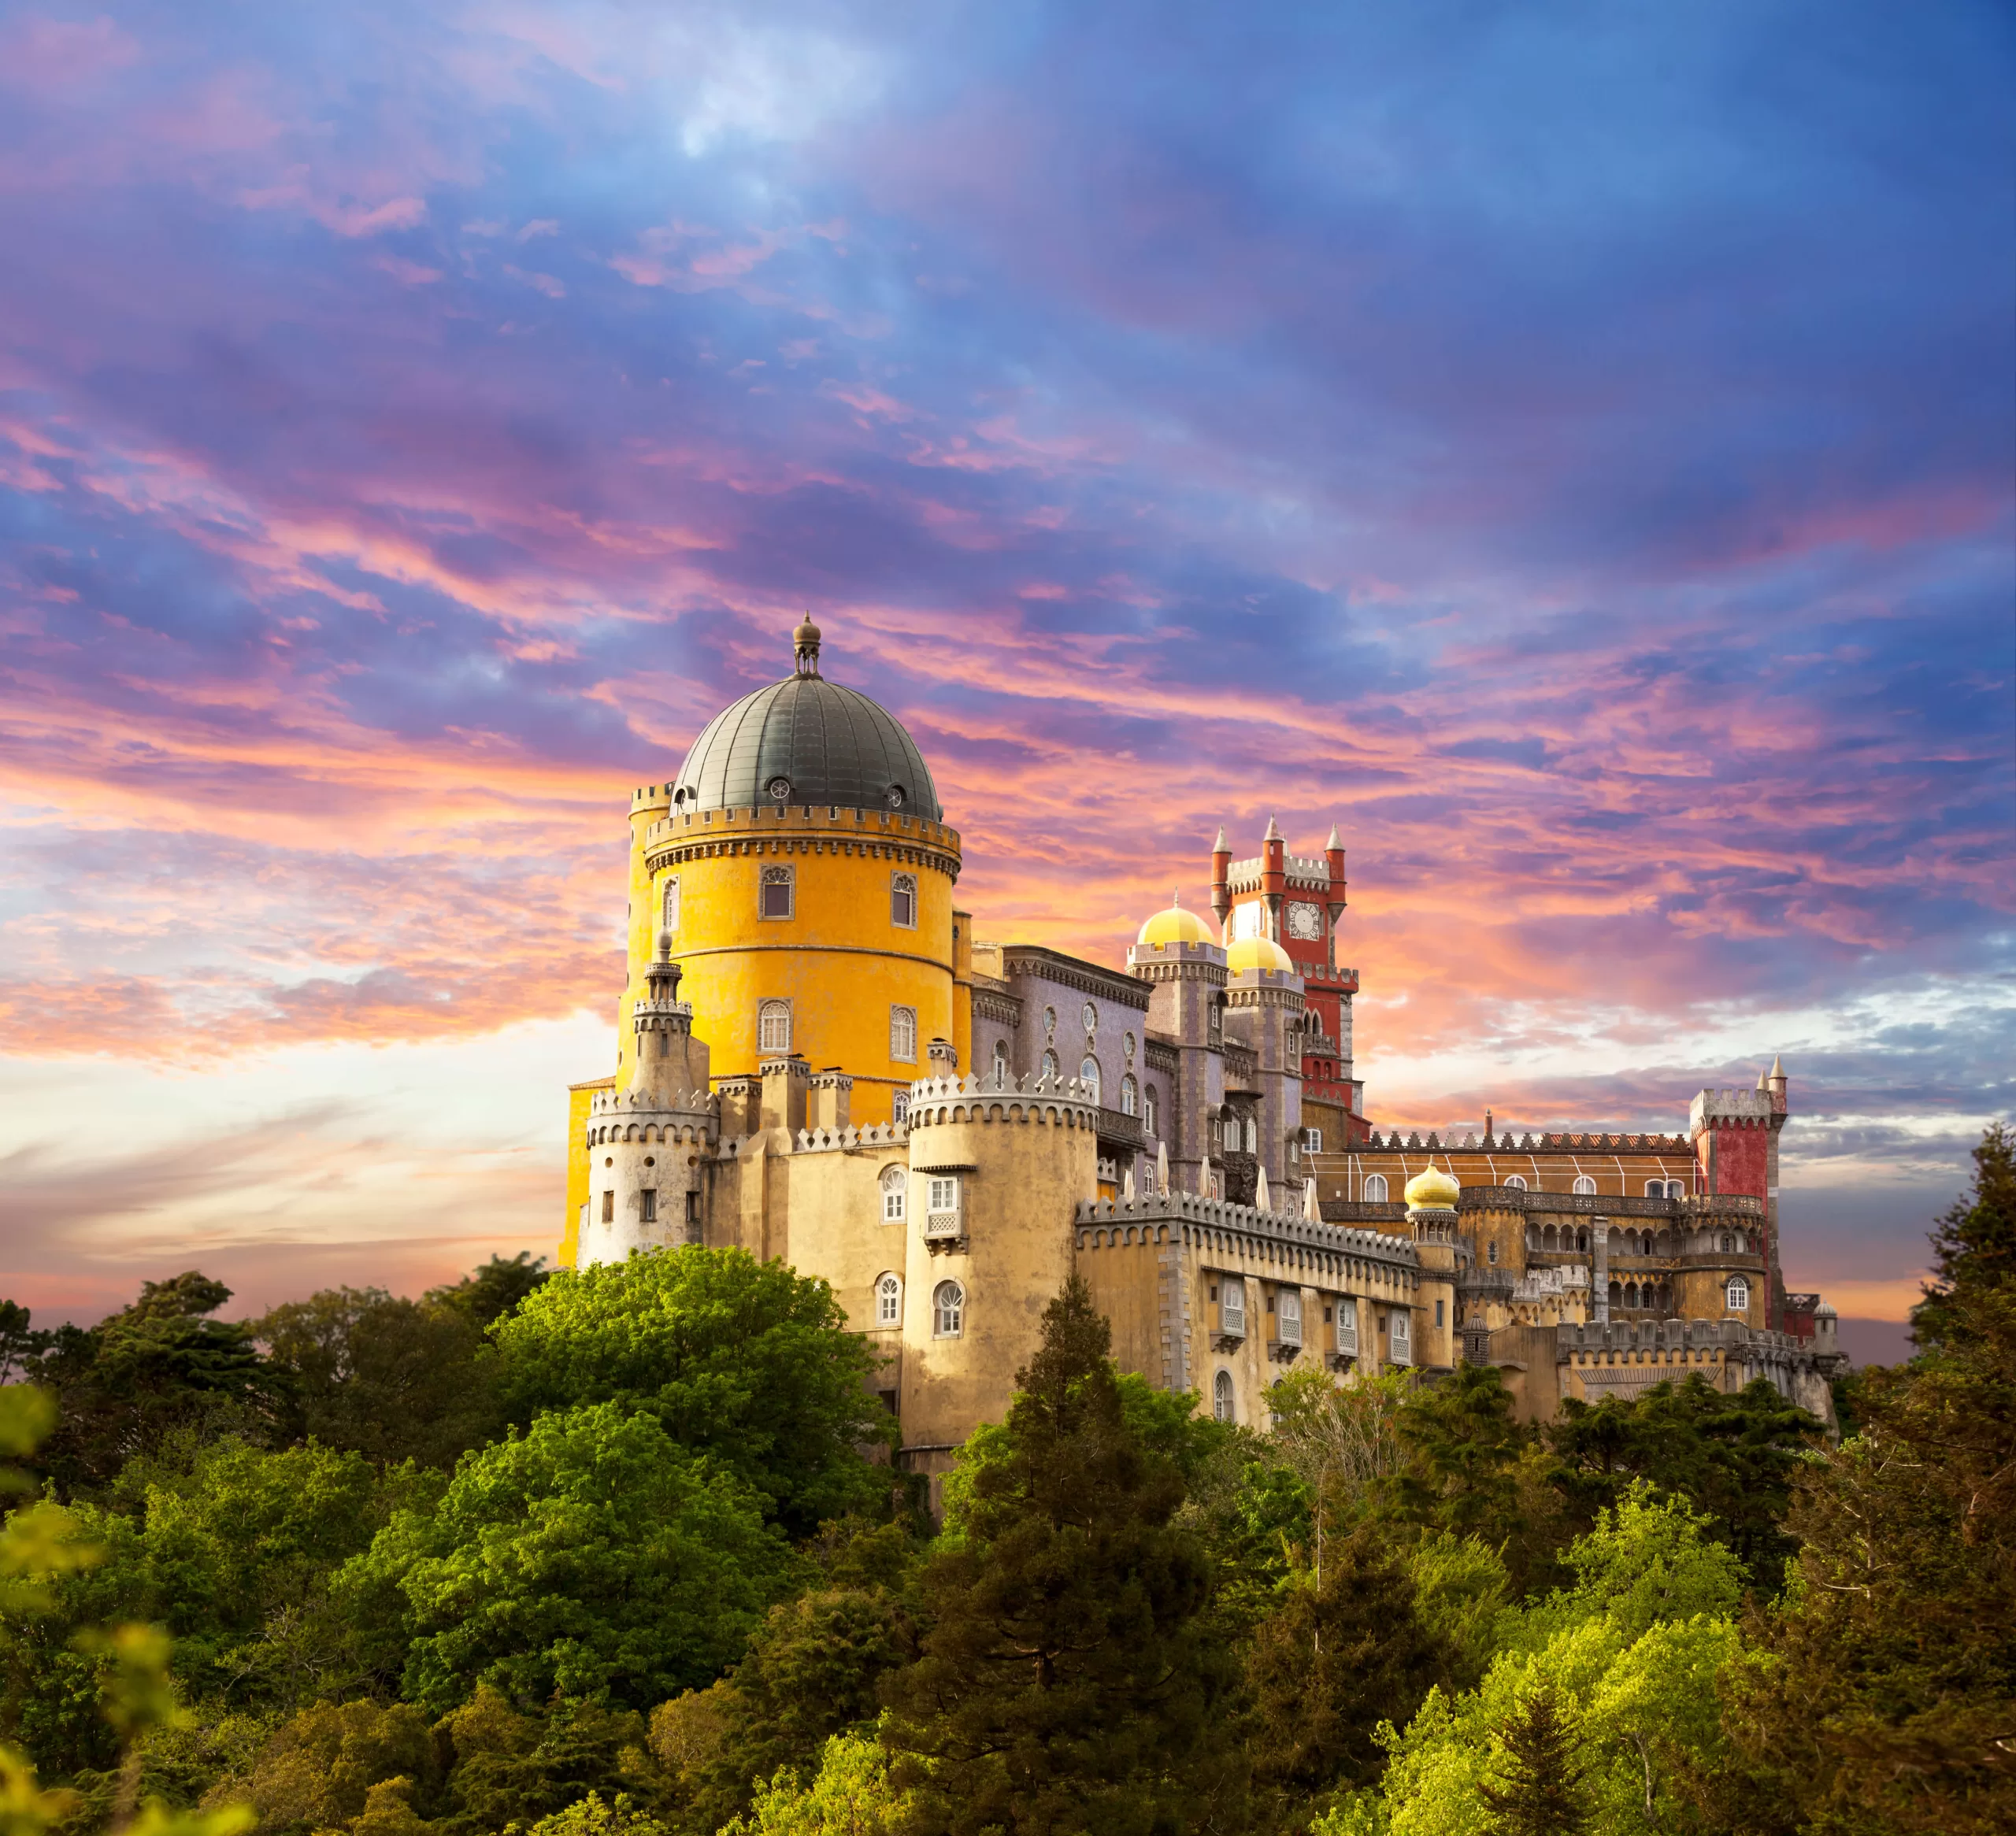 fairy-palace-against-sunset-sky-panorama-of-palace-in-sintra-portugal-europe